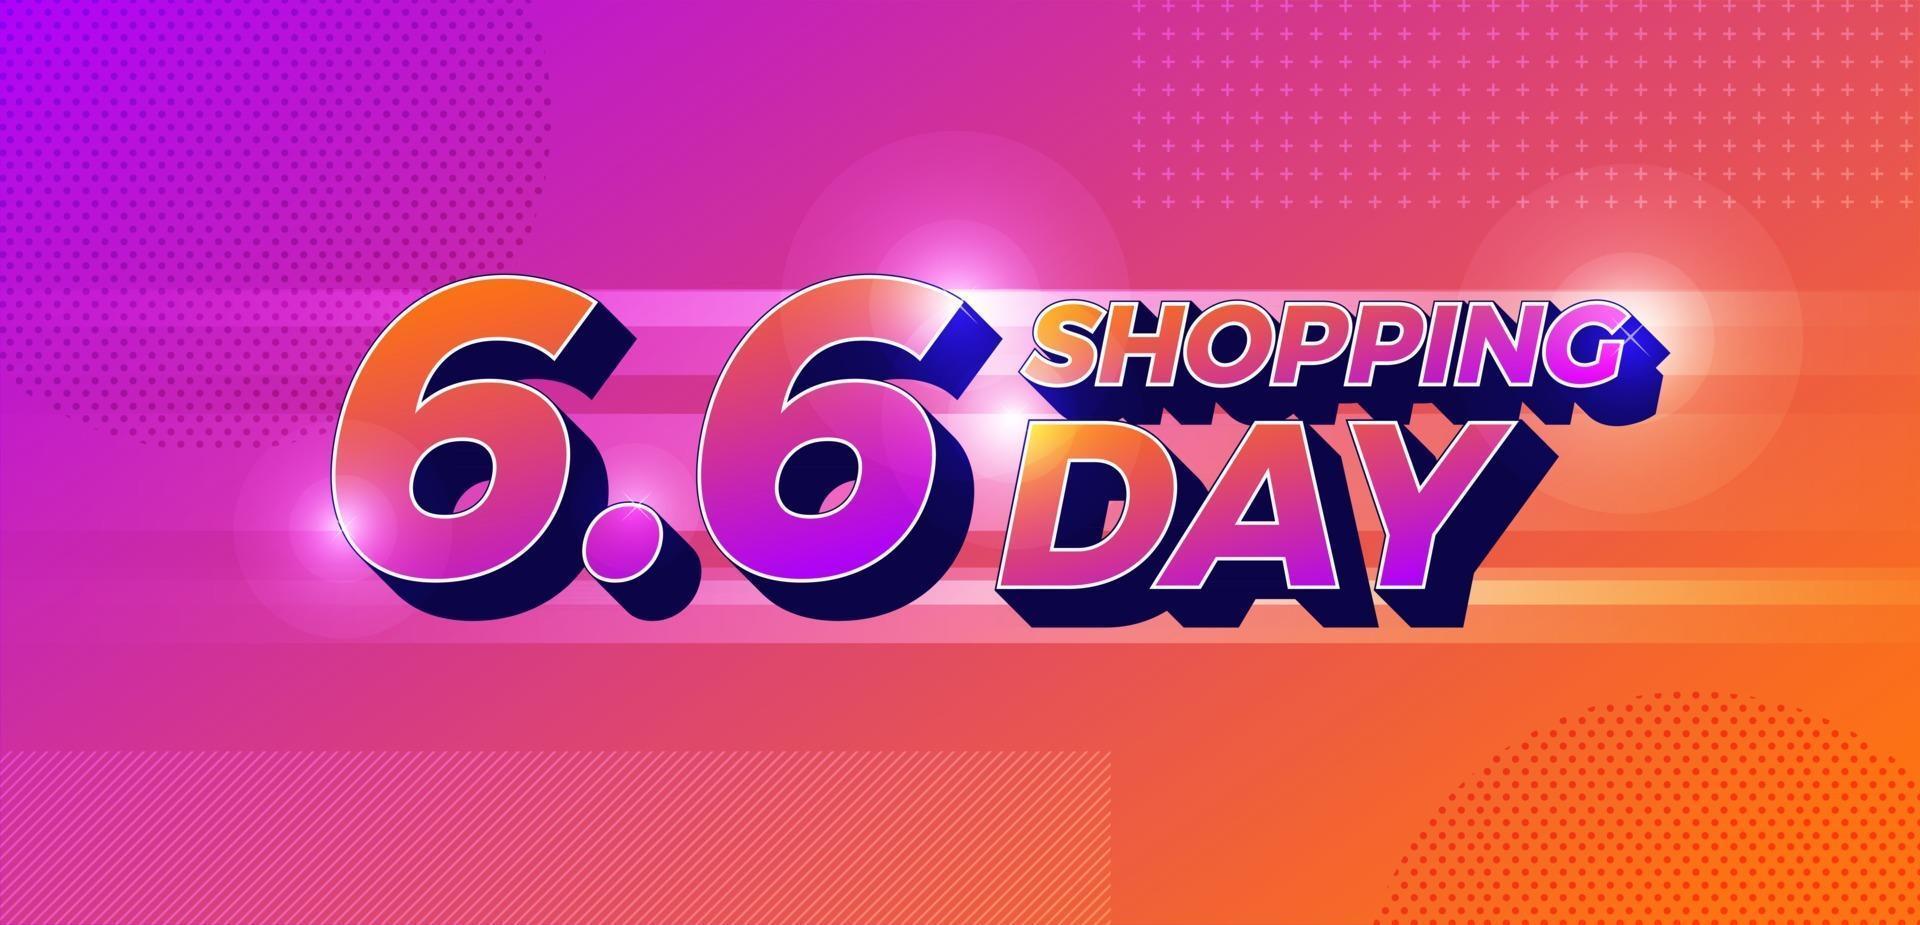 Flat design concept 6 6 global shopping day vector